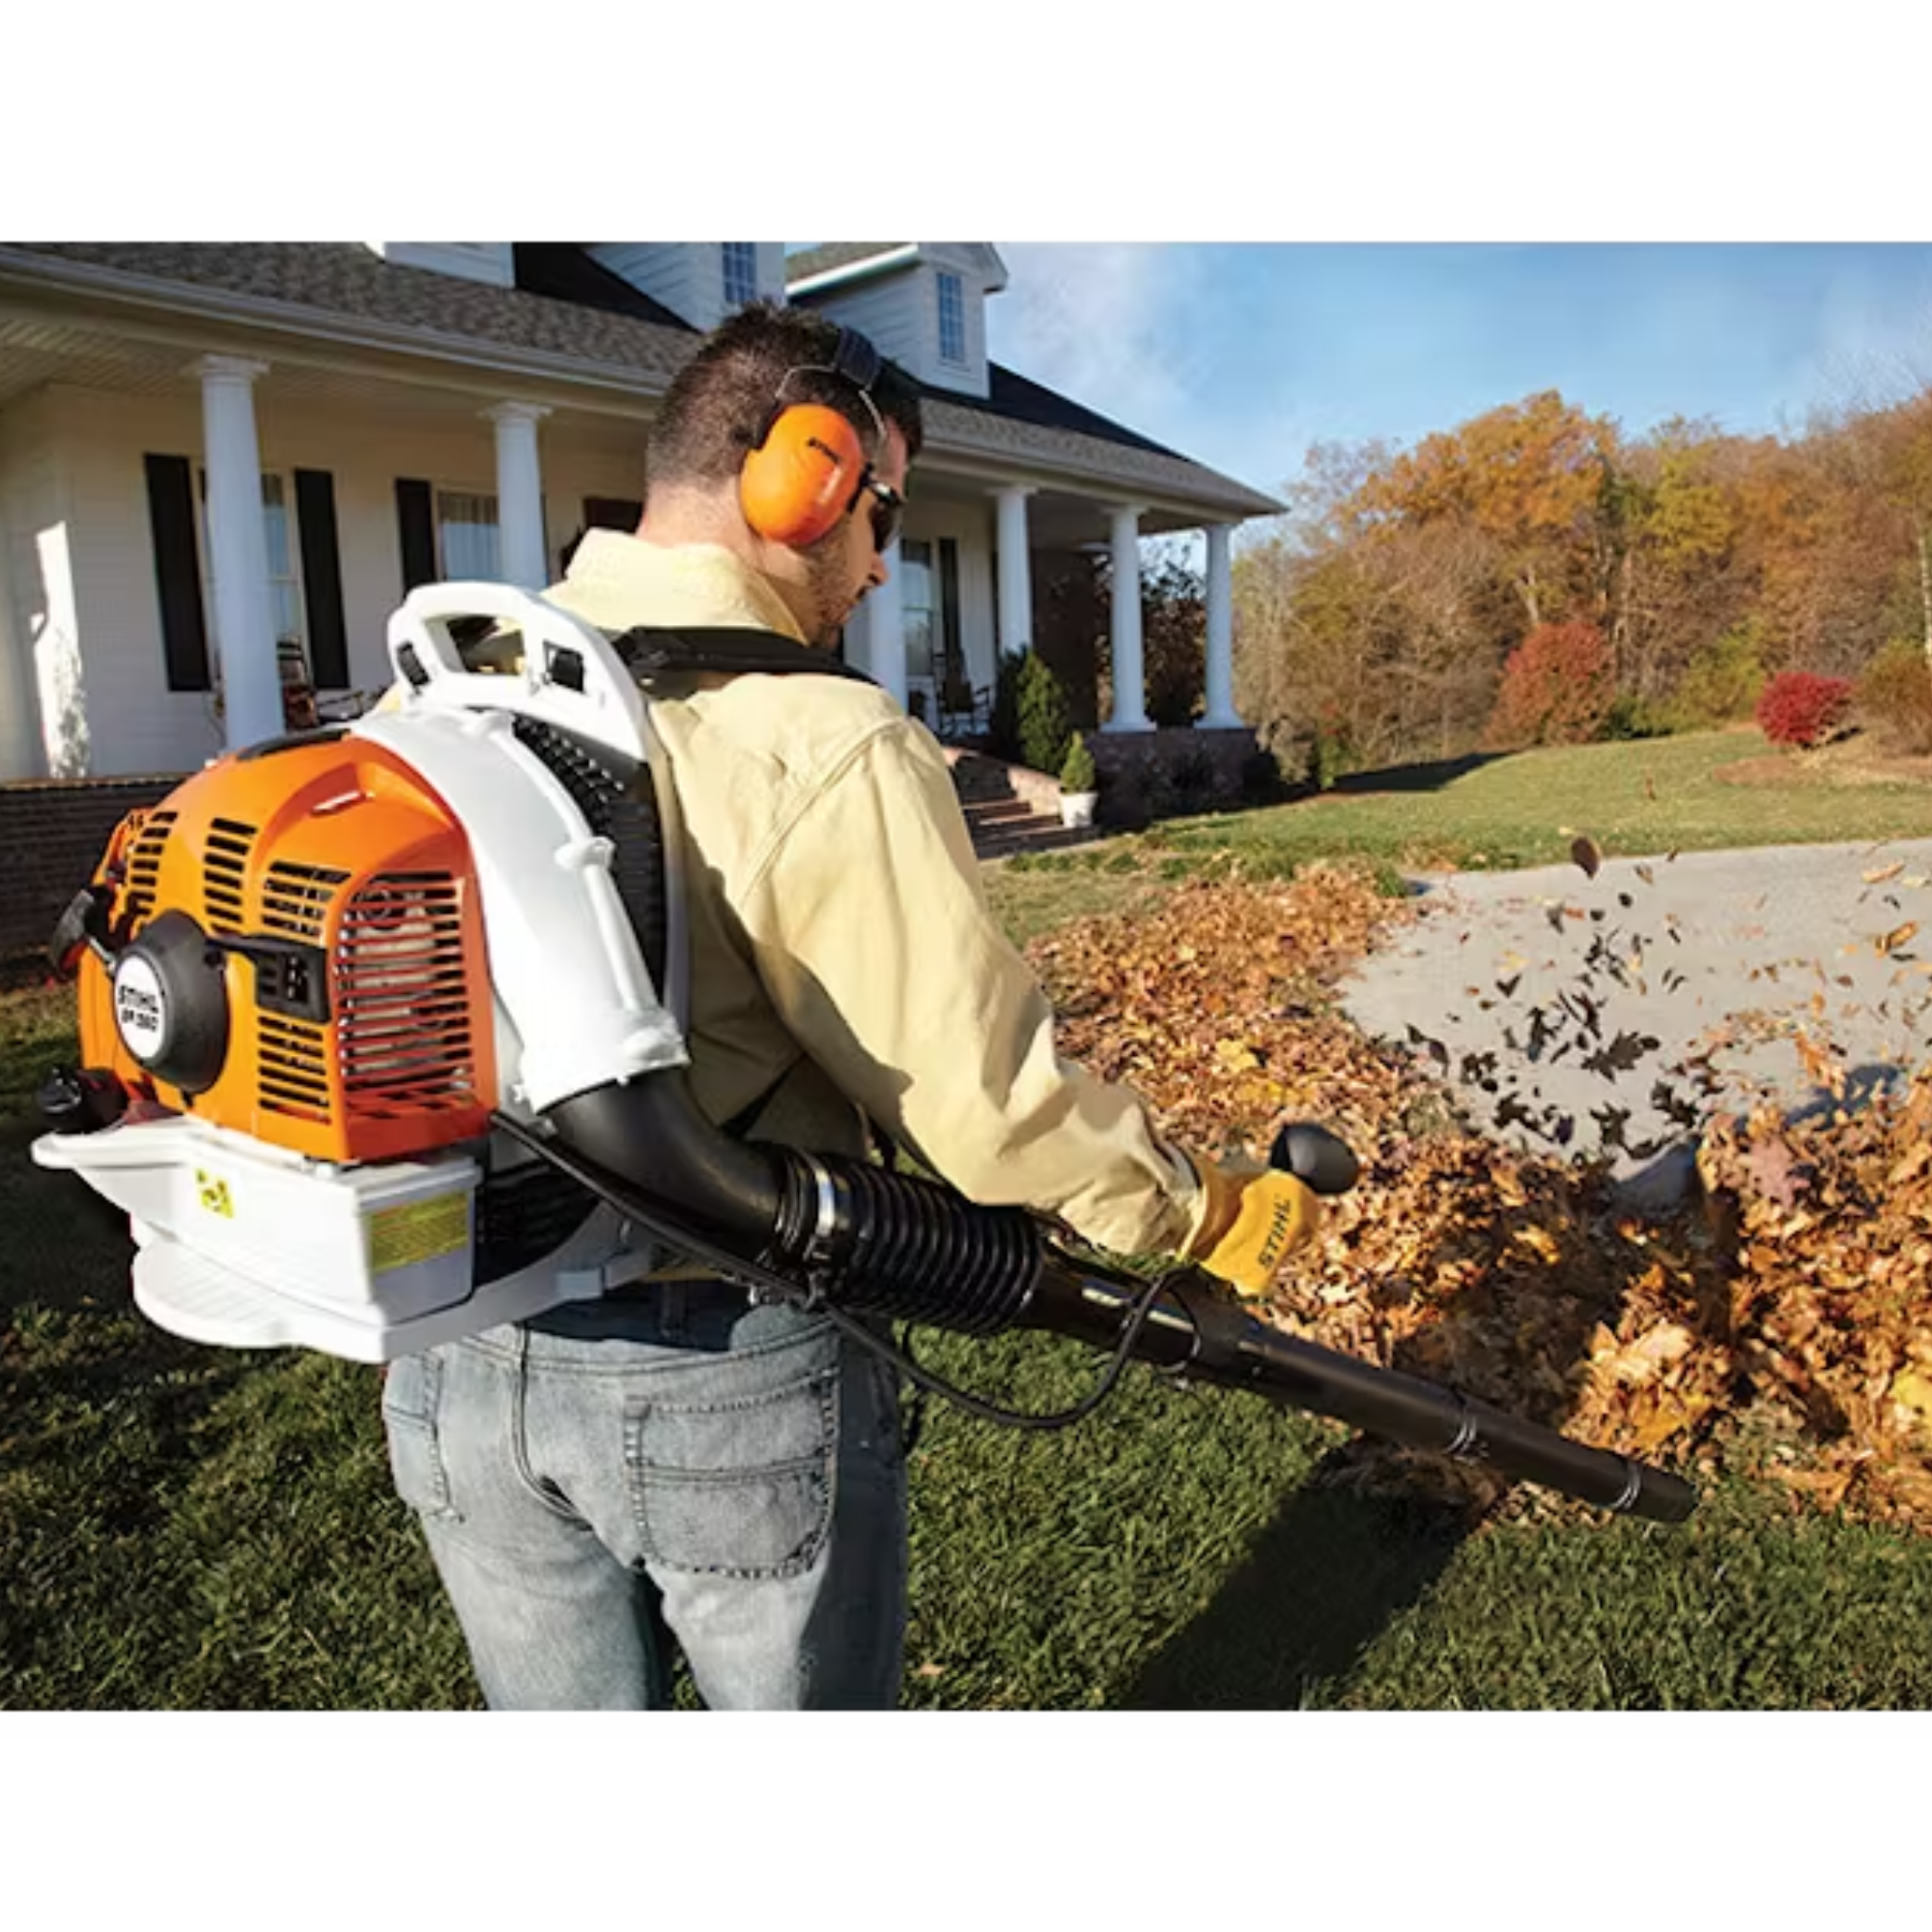 Stihl BR 350 Gas Powered Backpack Blower